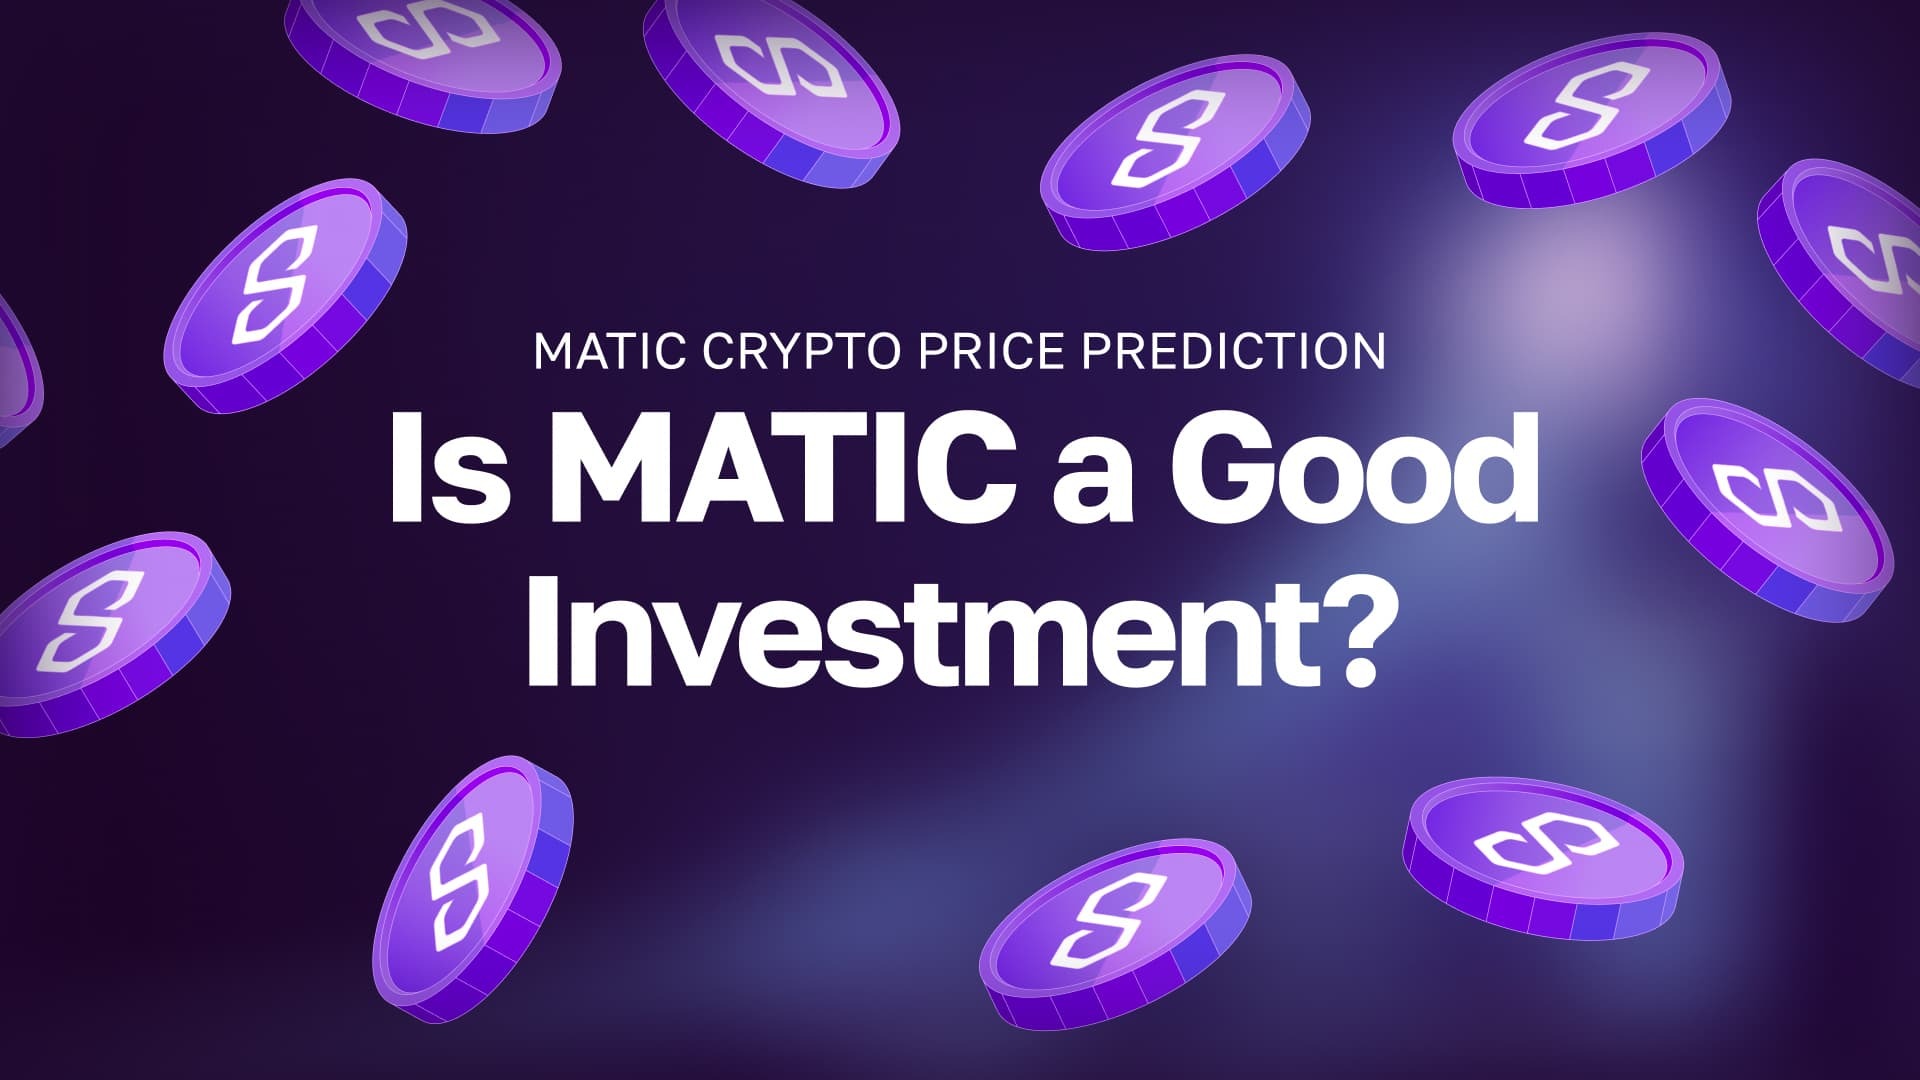 MATIC Crypto Price Prediction - Is MATIC a Good Investment?